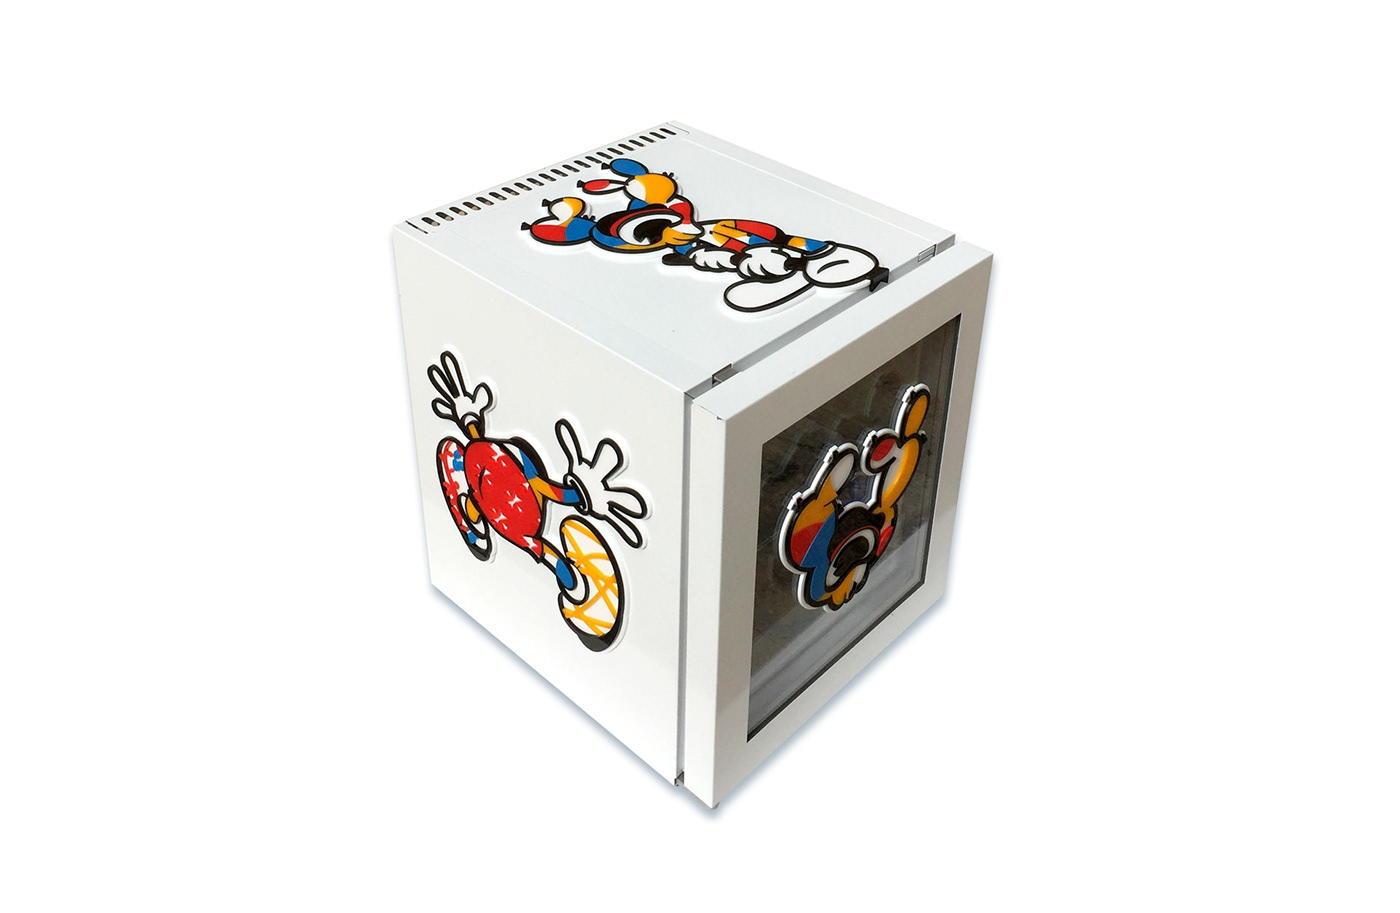 Top view of Zack Ritchie's canvas cooler entry showing vibrant 2d relief artwork on each side.